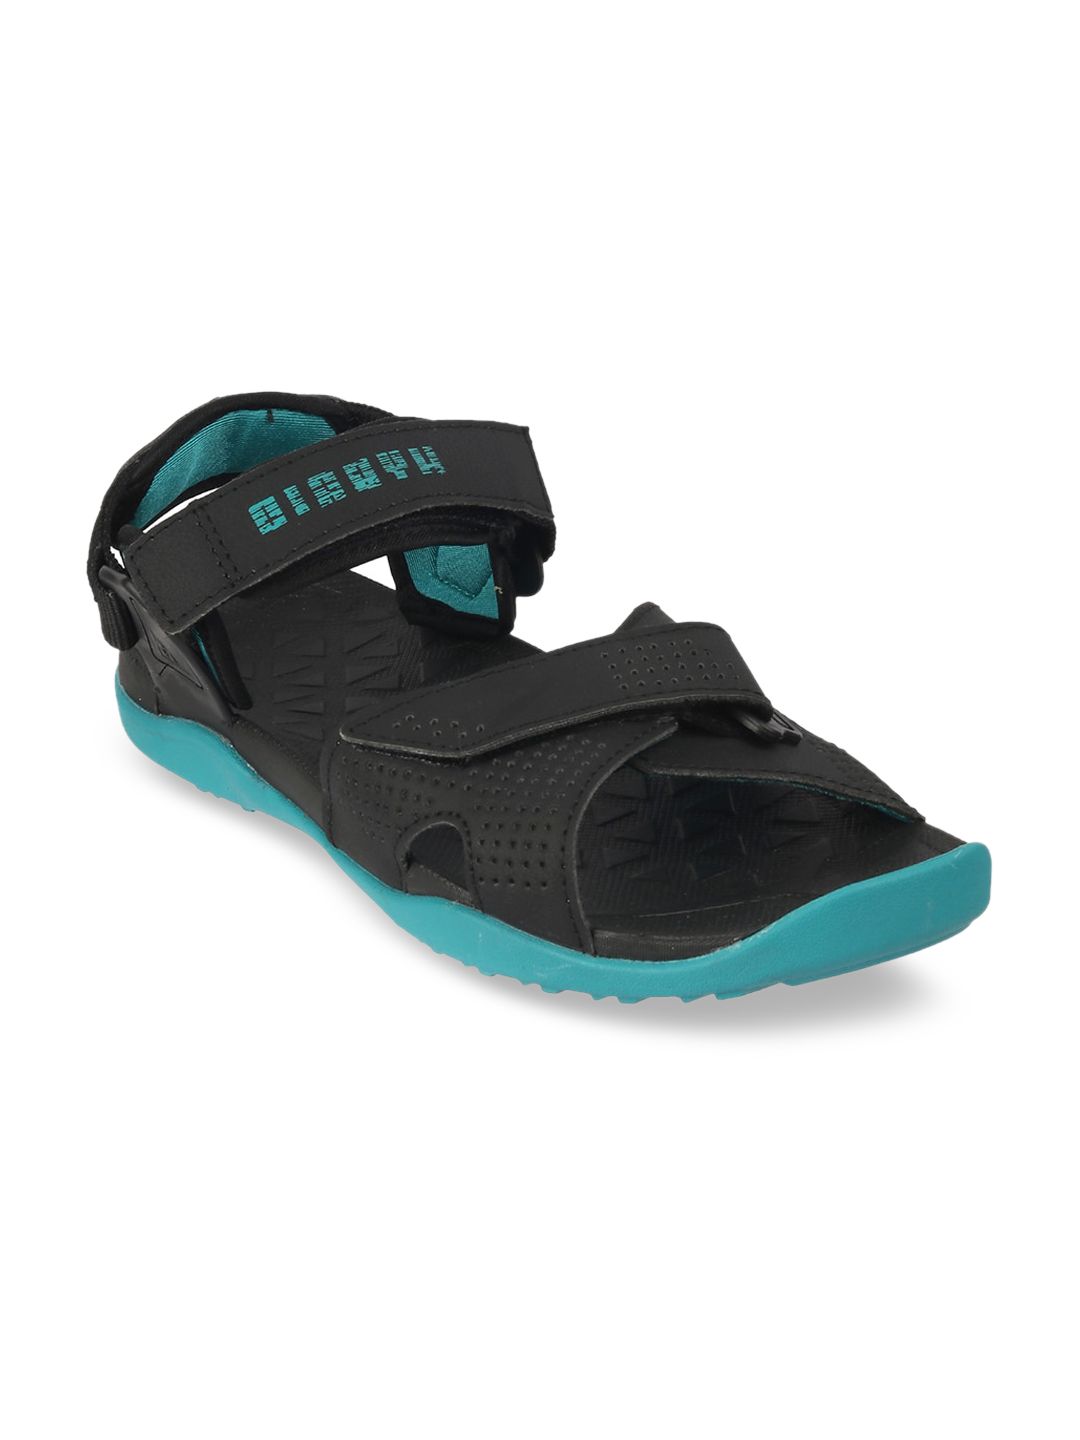 Vento Unisex Black & Blue Solid Sports Sandals Price in India